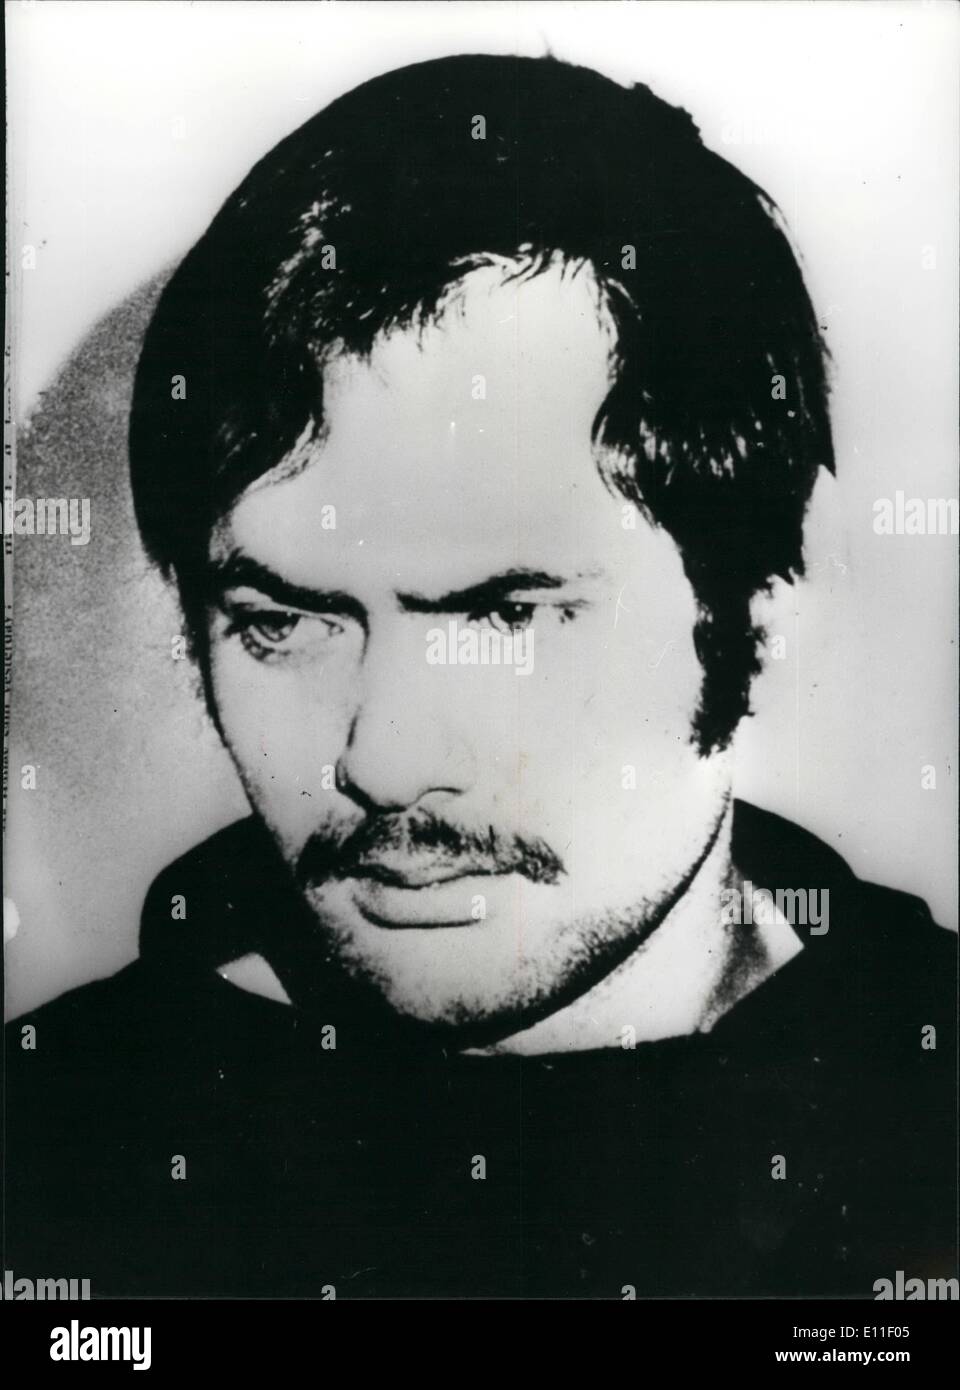 Oct. 10, 1977 - Andreas Baader And His Girlfriend Gudrun Kill Themselves In Jail. Andreas Baader, 34, the leader of the Red army faction, the terrorist gang known as the Baader-Meinhof group and his girlfriend Gudrun Ensslin, 37, who became co-leader with Baader after the suicide in prison last year of Ulrike Meinhof, killed themselves in the prison at Stuttgart where they are serving life. Other members if the gang it is believed have killed themselves, or tried to do so. Photo Shows:- Baader, the leader of the Baader-Meinhof group who shot himself in prison. Stock Photo